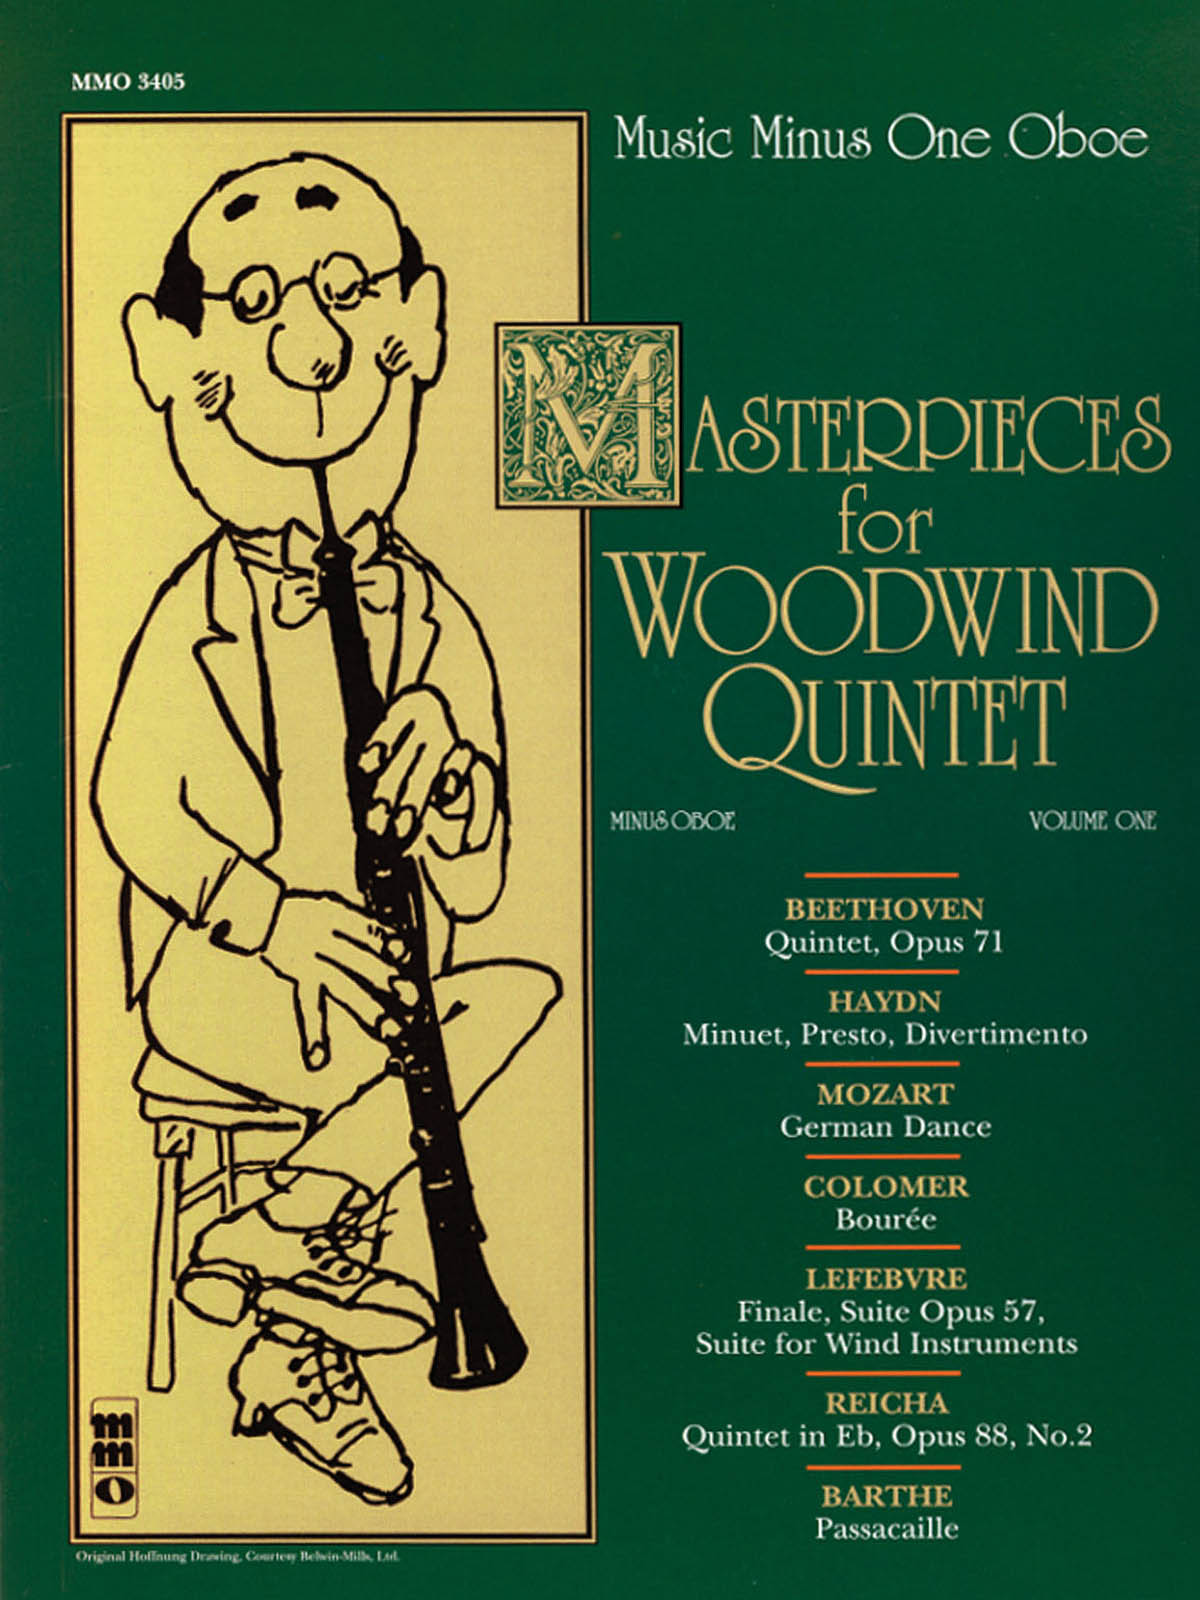 Masterpices for Woodwind Quintet – Volume One